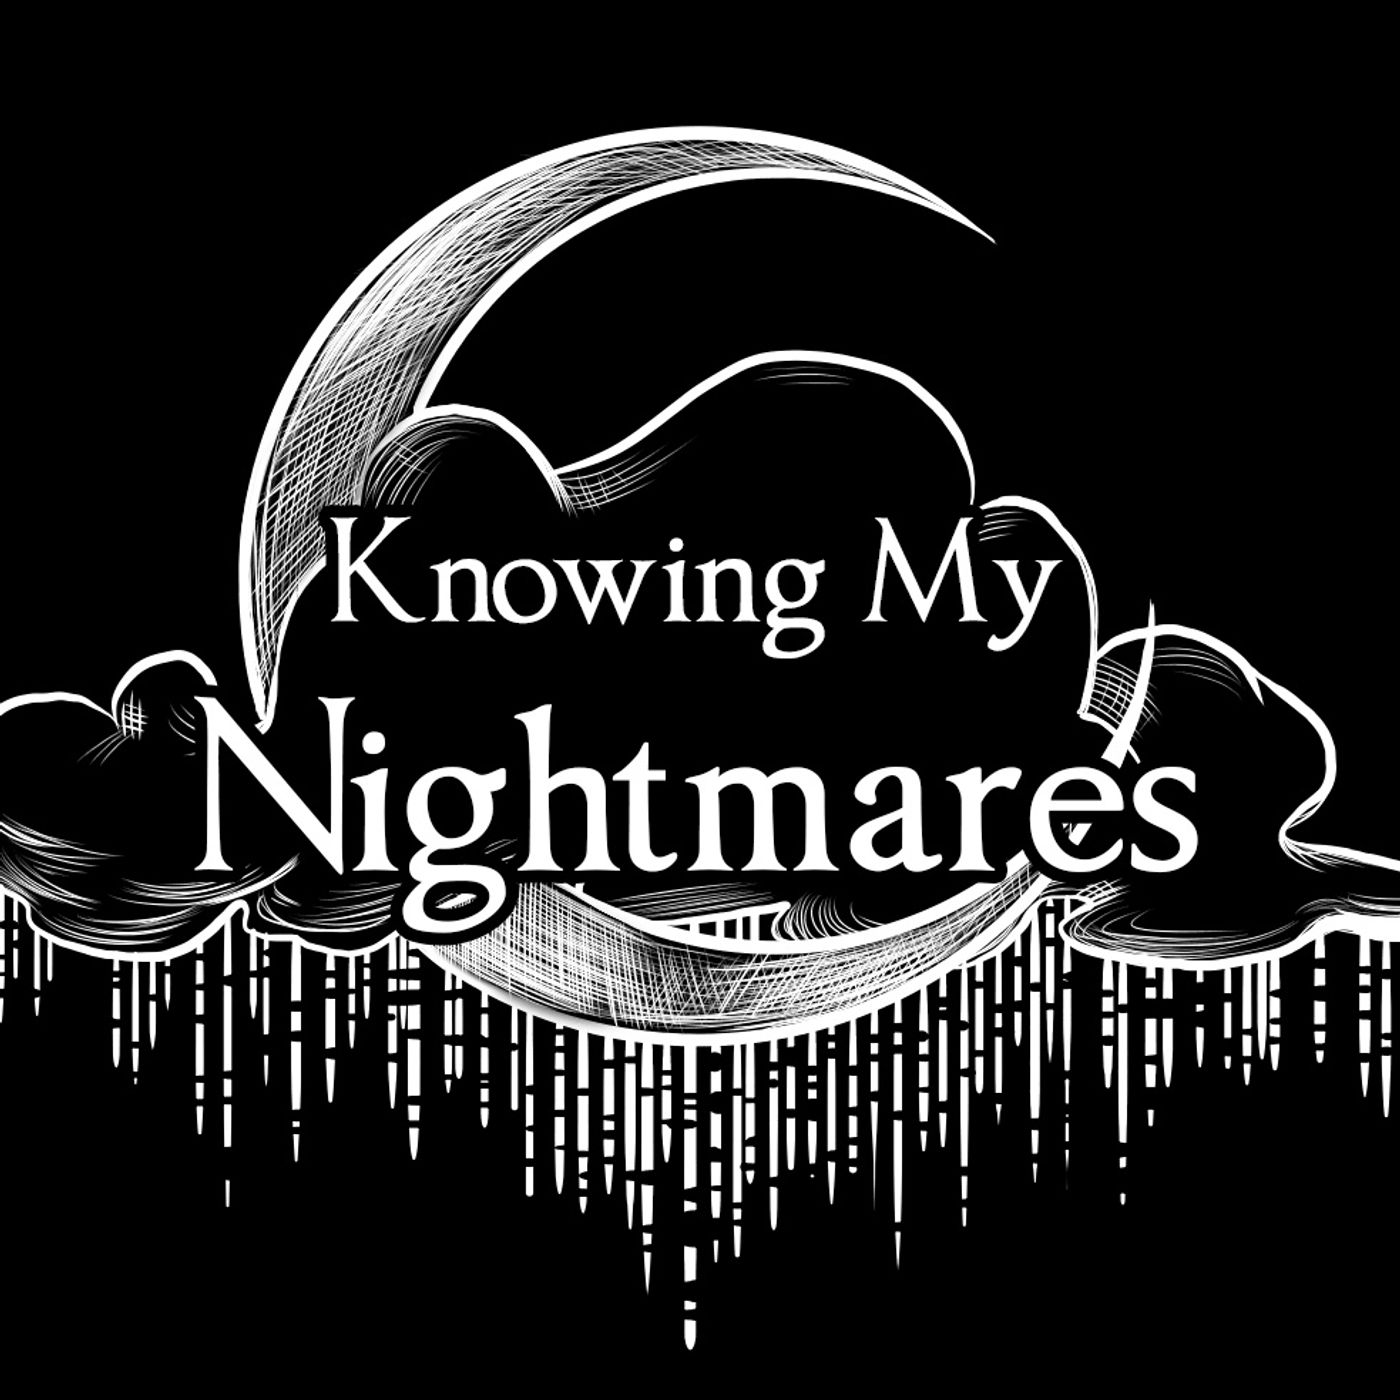 "Knowing My Nightmares" Podcast